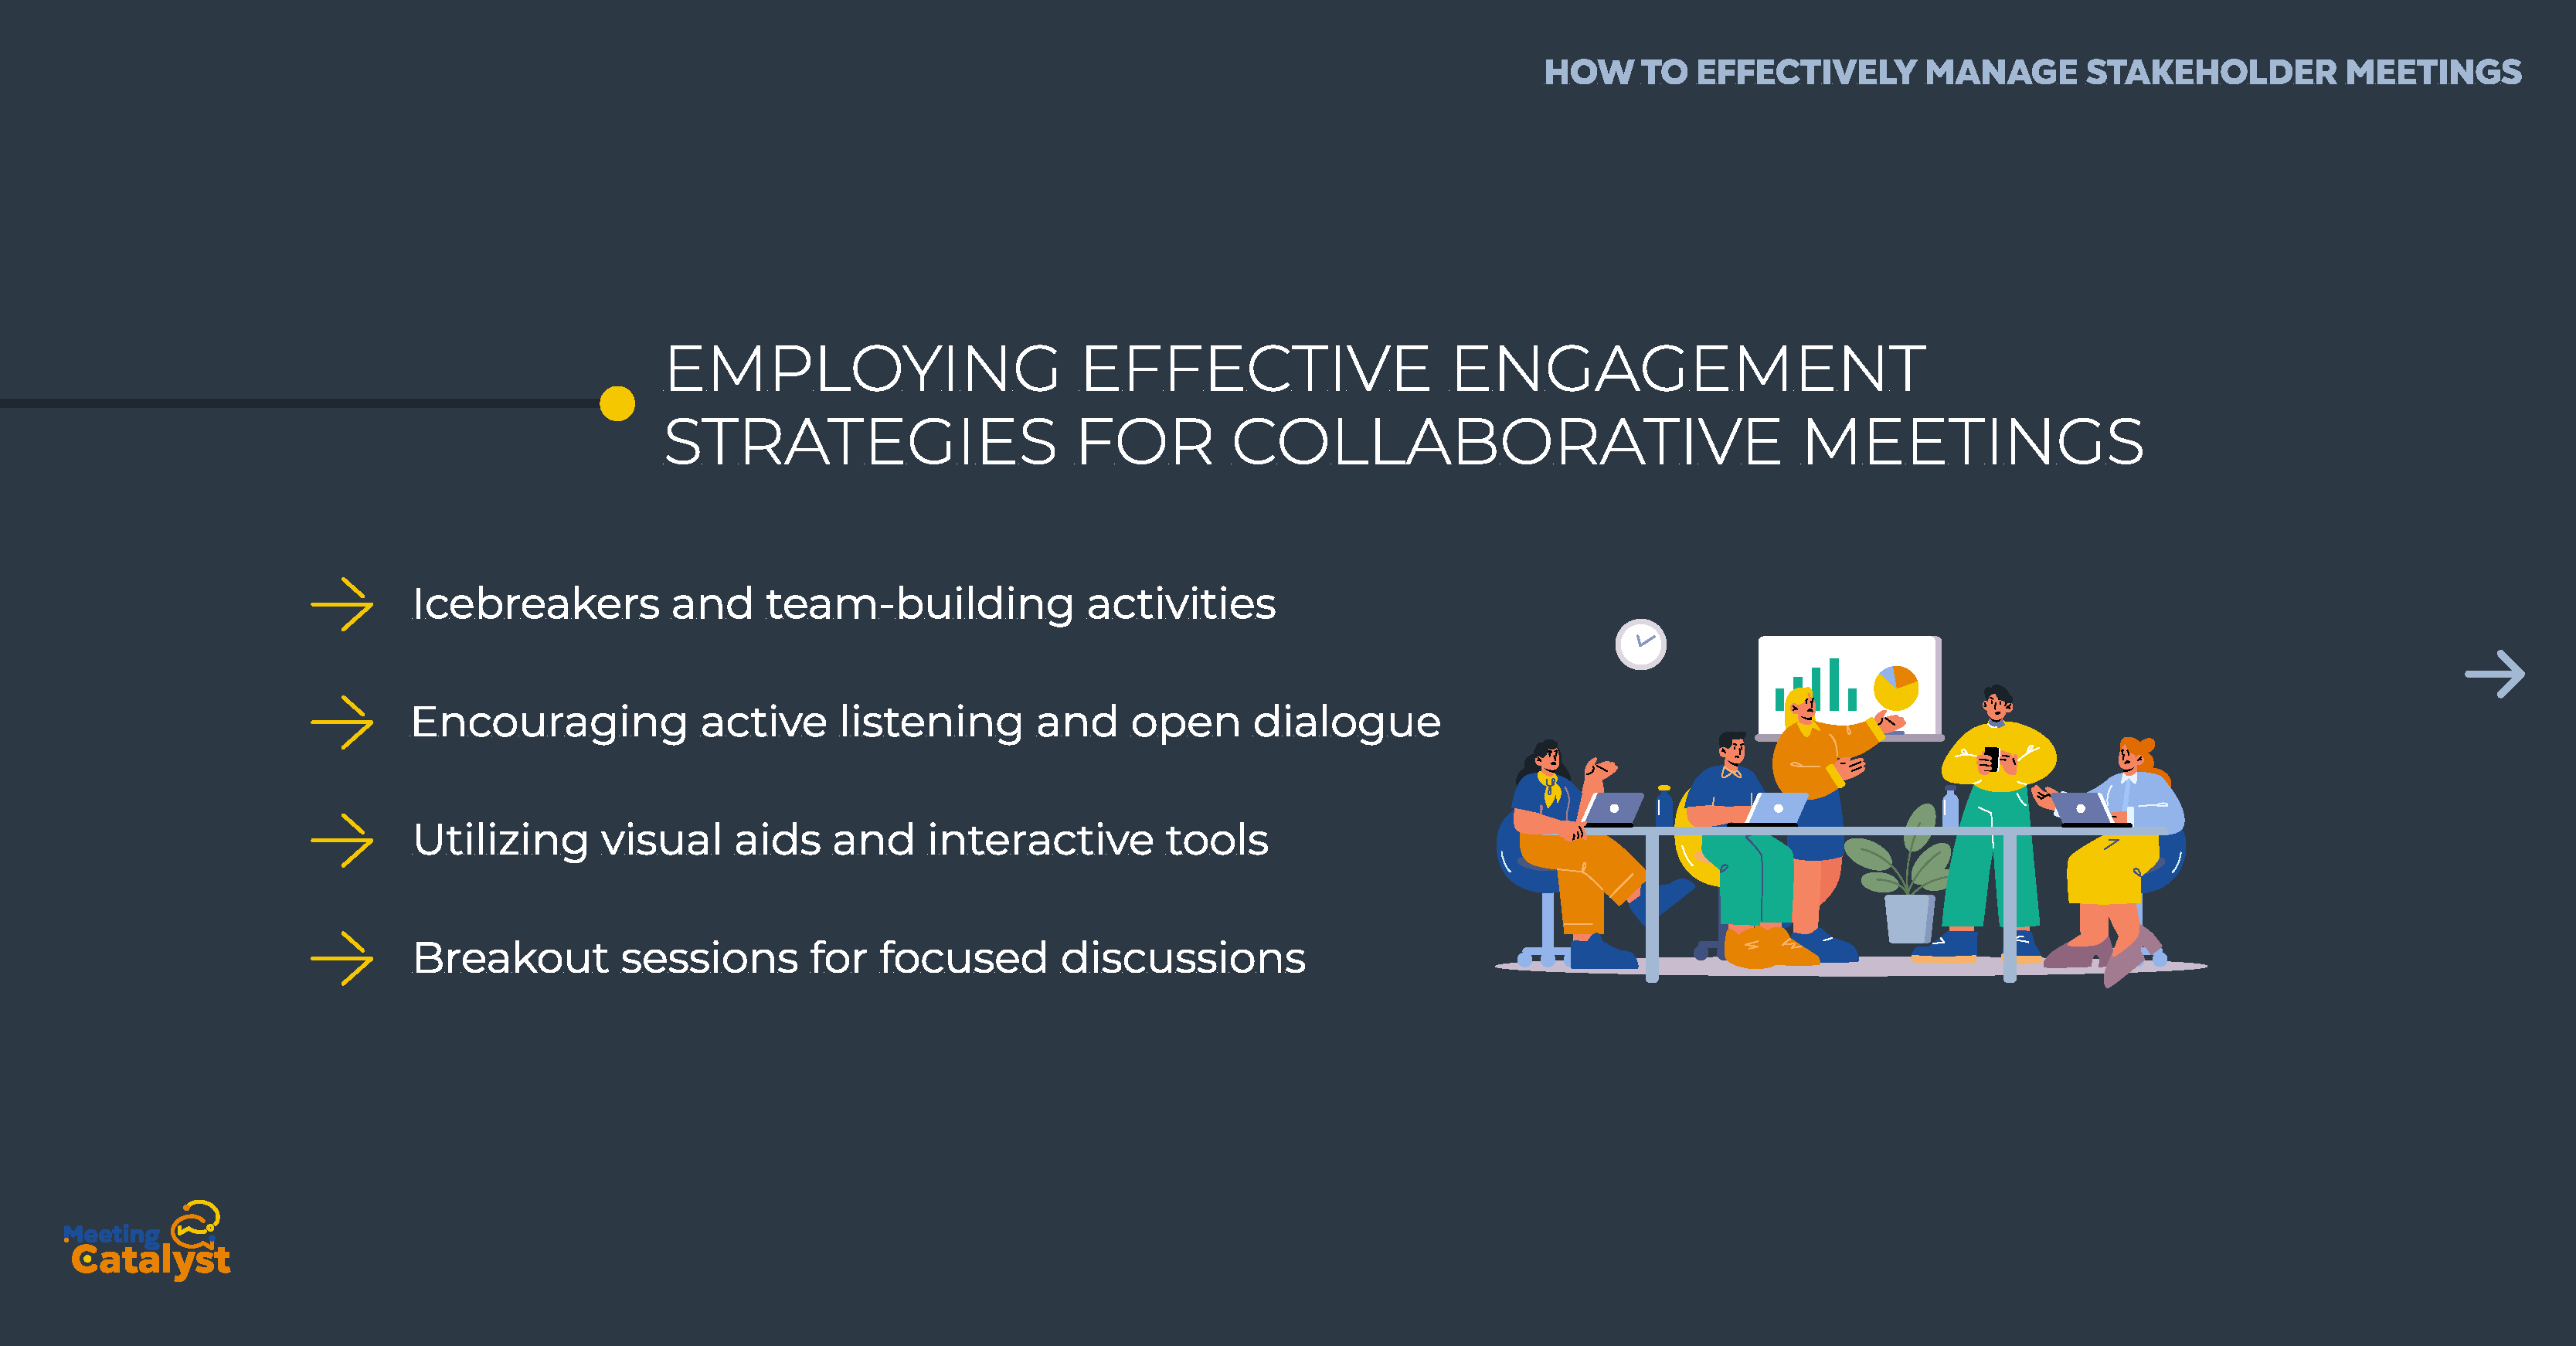 Bullet points listing effective engagement strategies for meetings